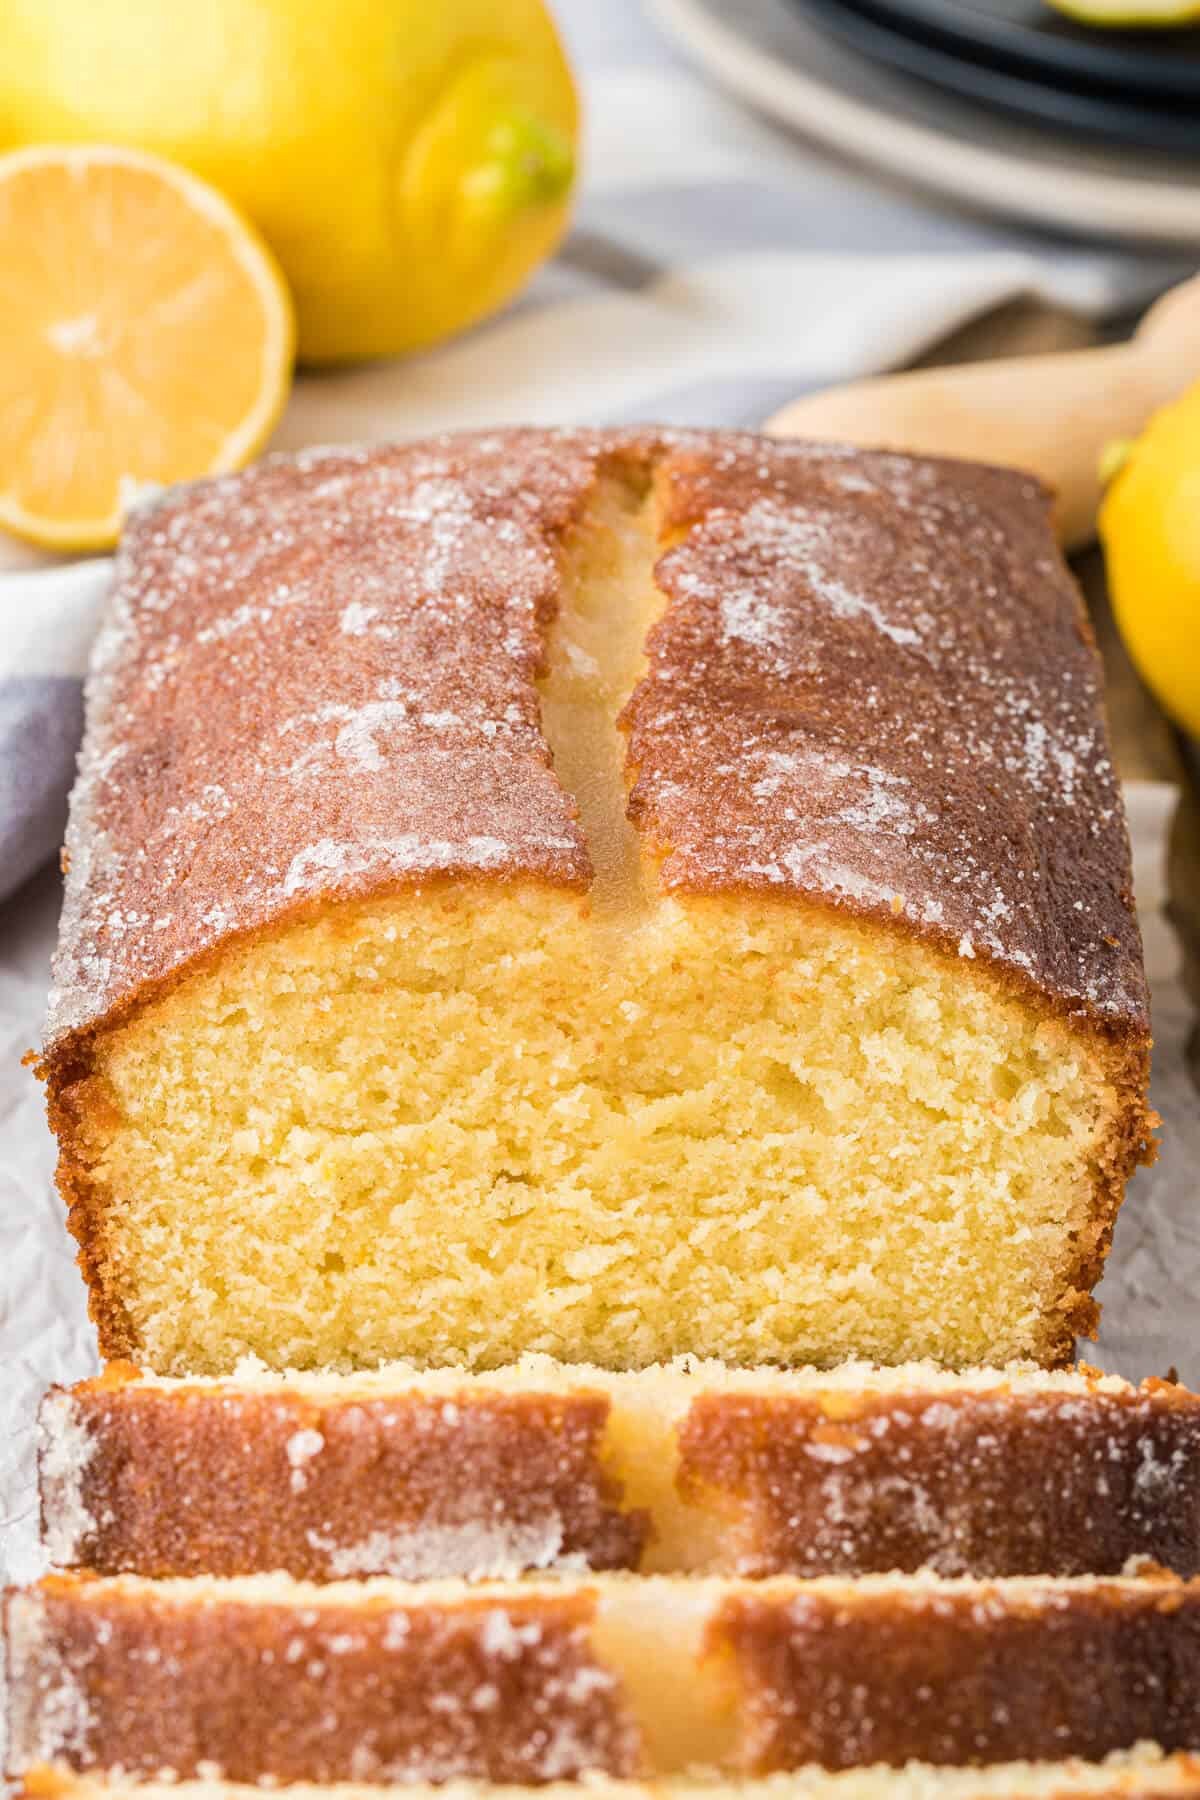 Lemon bread with pieces cut off on the end.